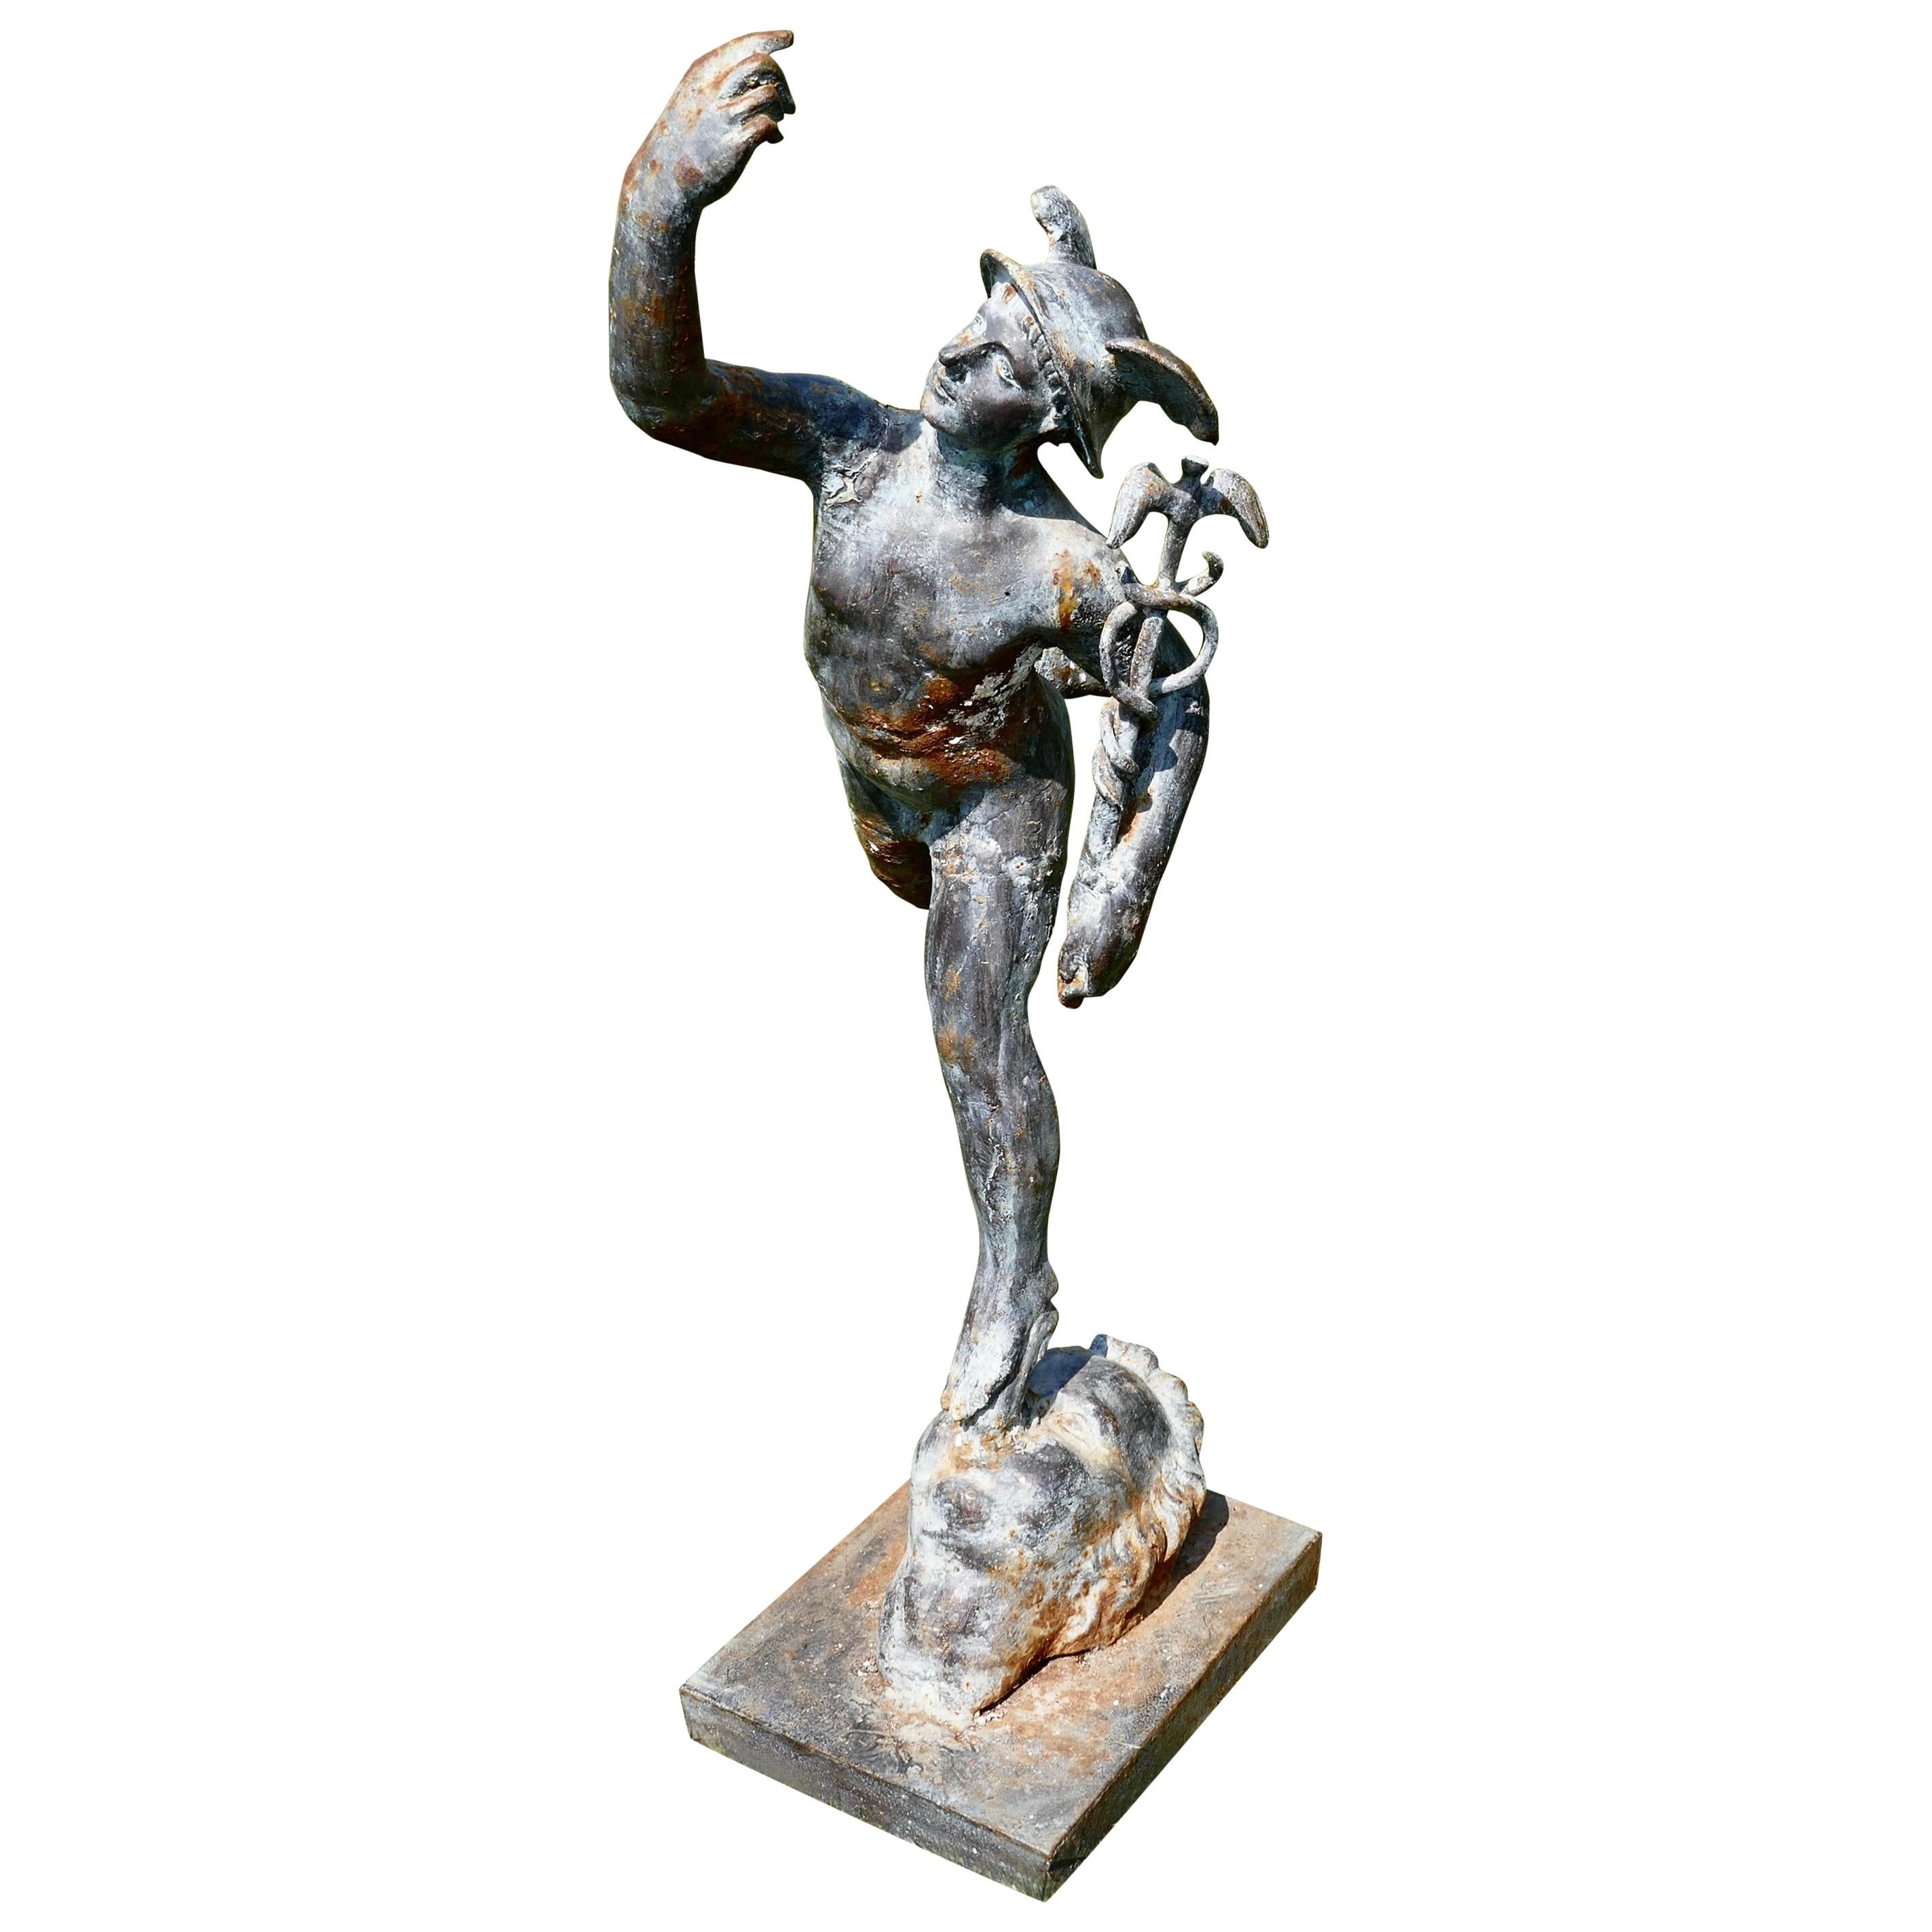 Large Weathered Iron Garden Statue of Mercury 'Hermes' the Winged Messenger